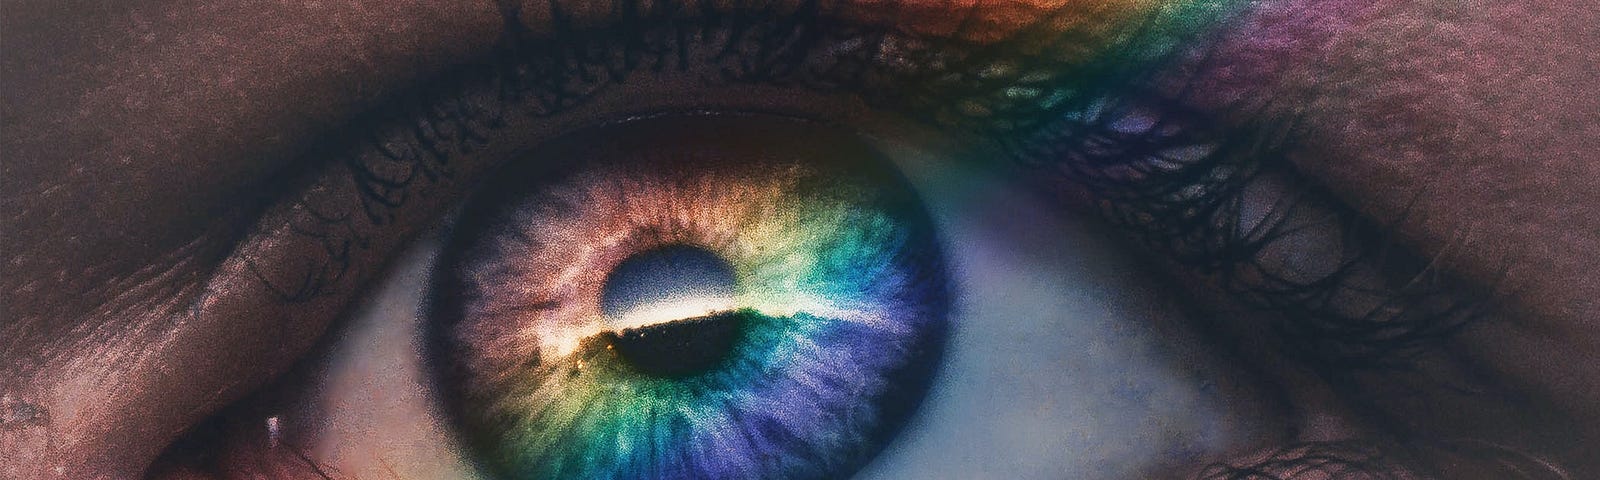 A close-up of an eye with a rainbow stripe of light overlapping it.